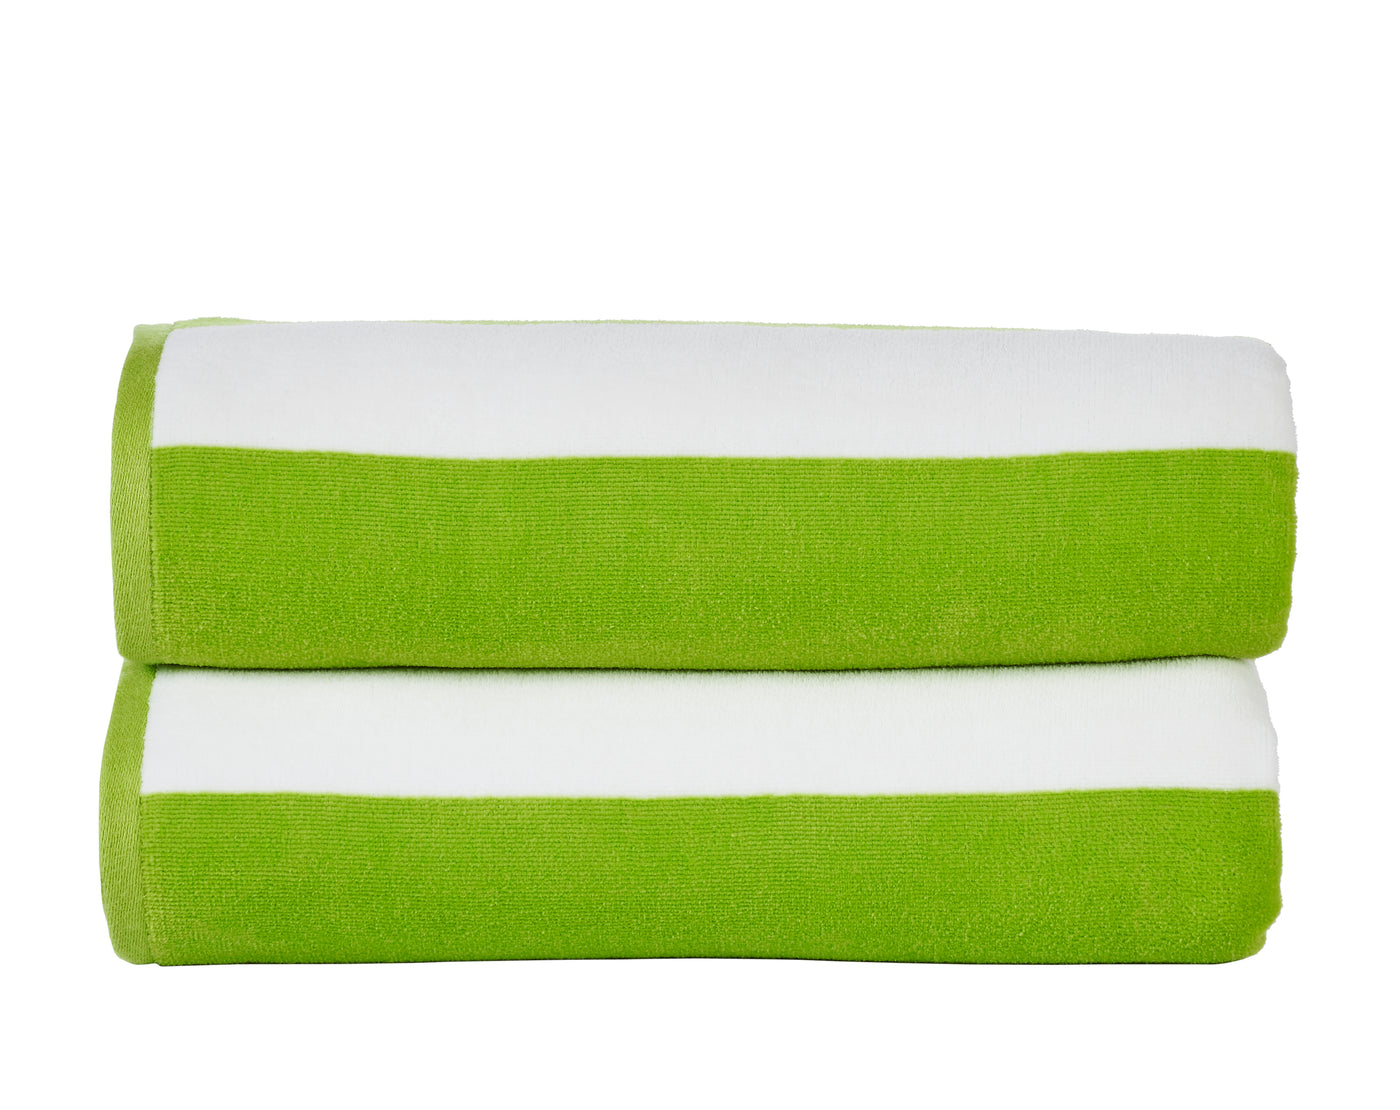 Cabana Stripe Velour Pool and Beach Towels 2 Pack (Lime)